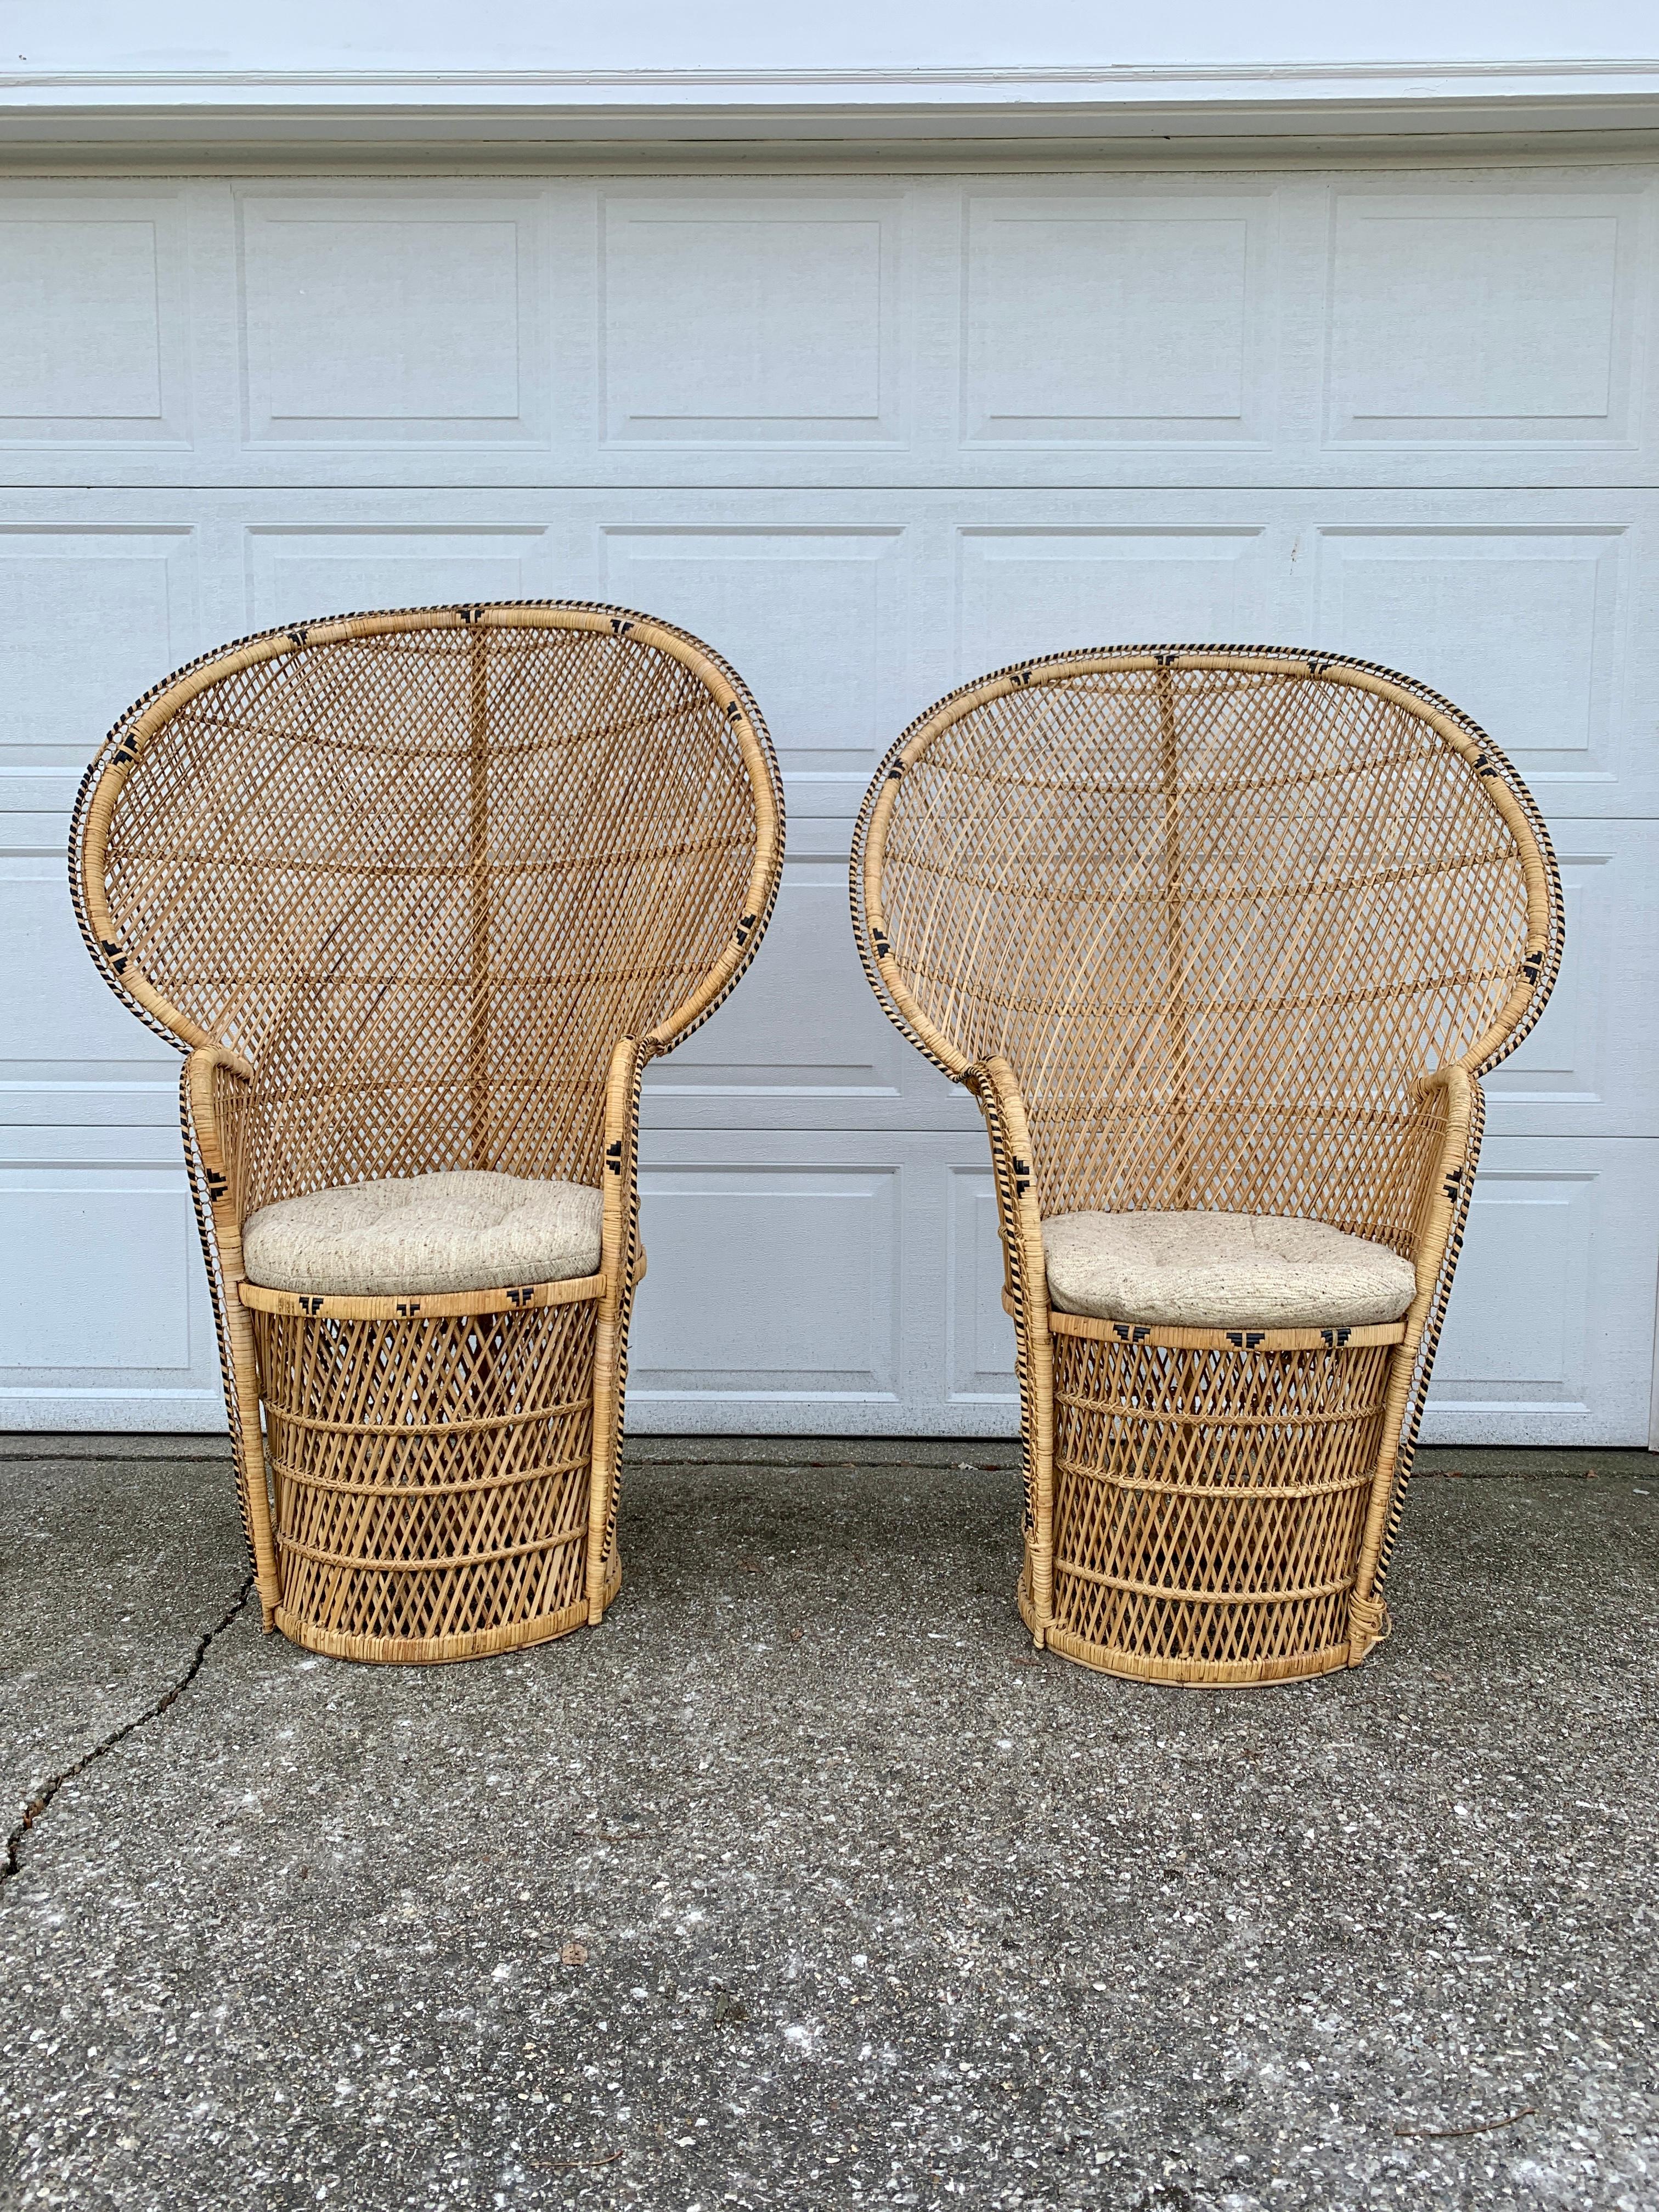 Bohemian Wicker Emanuelle Peacock Chairs, Pair In Good Condition For Sale In Elkhart, IN